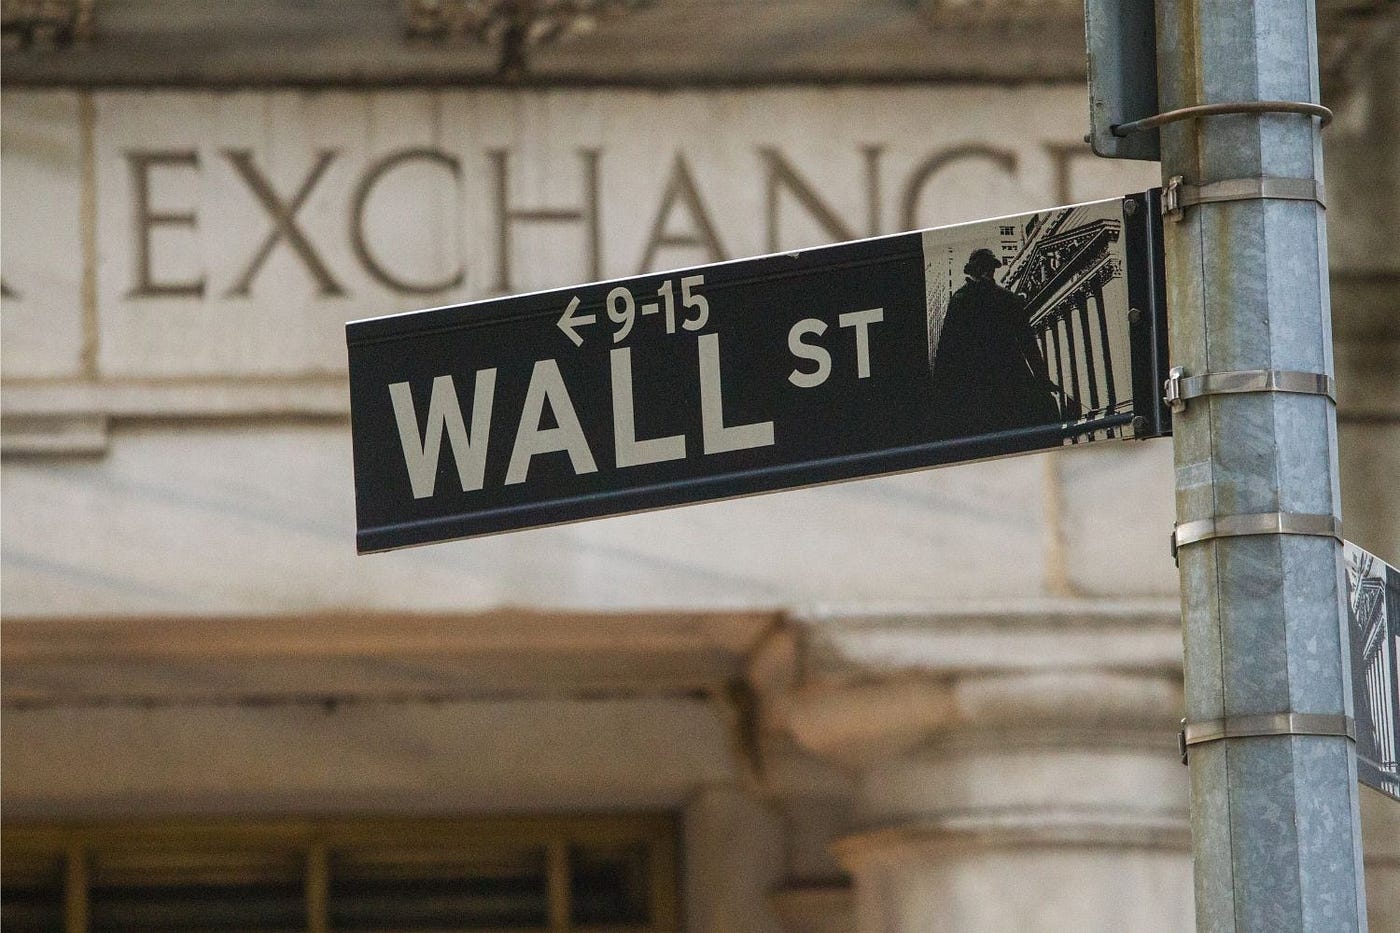 Wall Street sign in front of the stock exchange building.